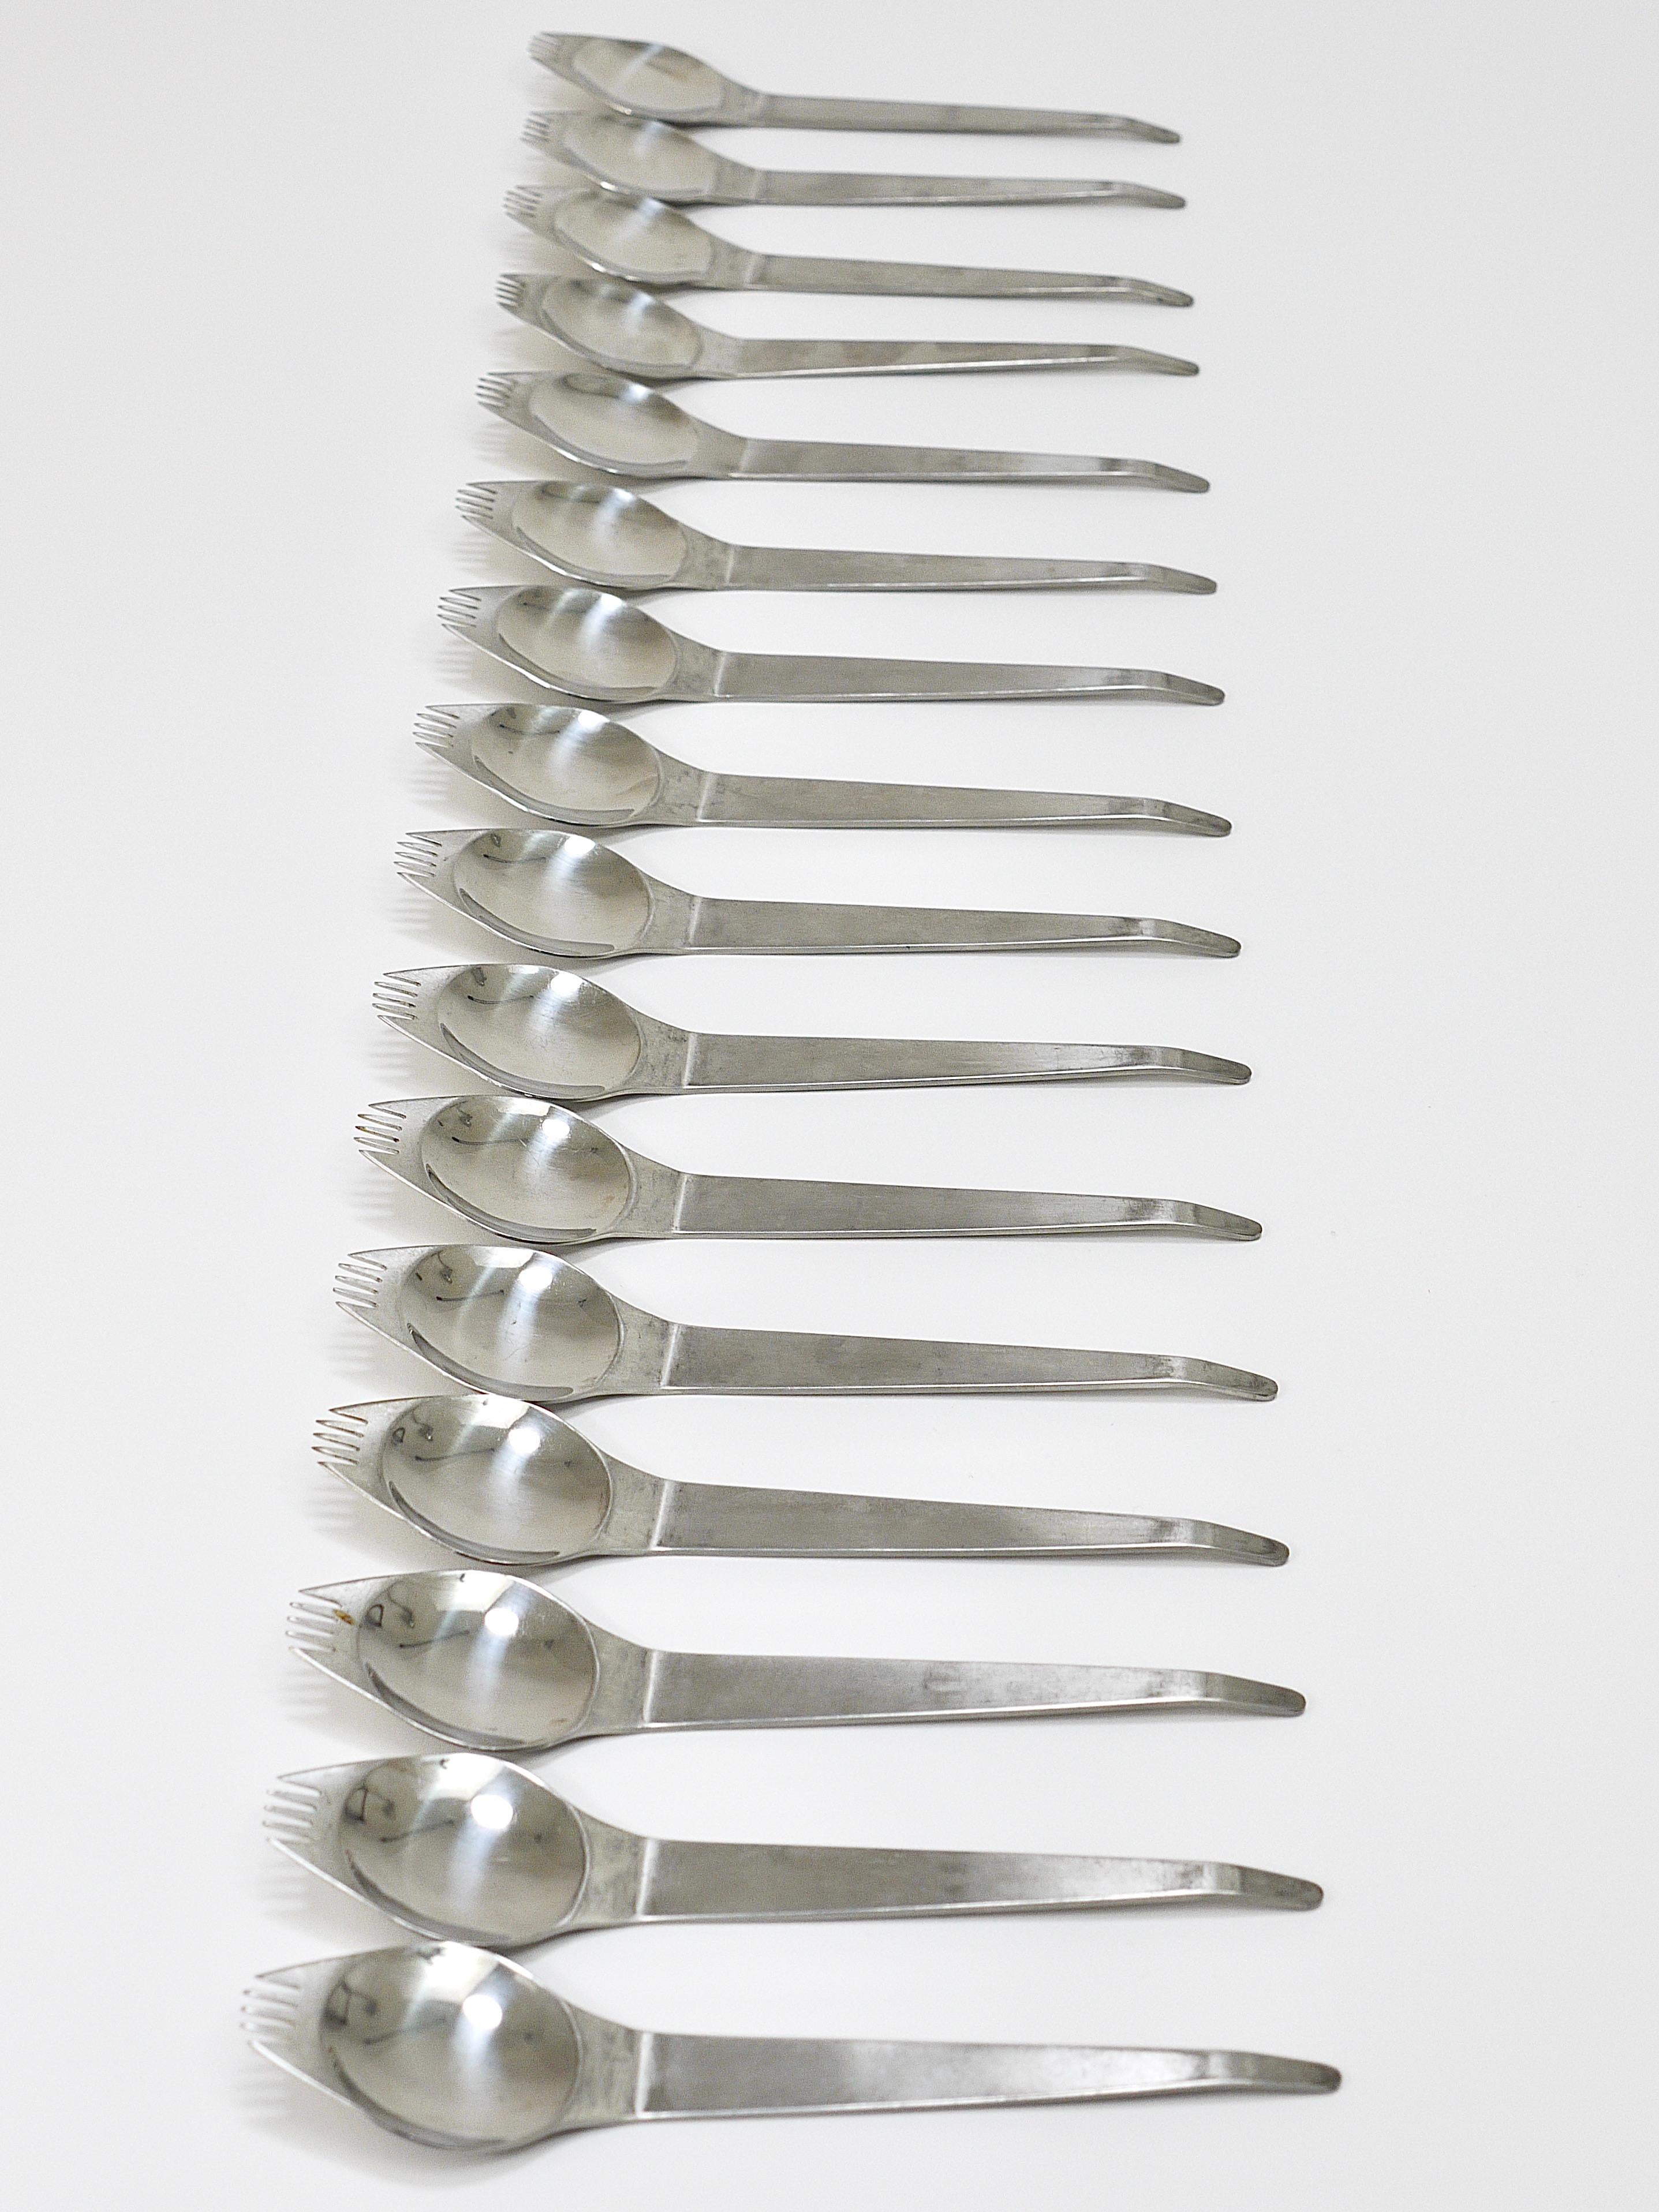 Up to 7 Midcentury Party Spork (Spoon & Fork) Flatware Göffel by Amboss Austria For Sale 1